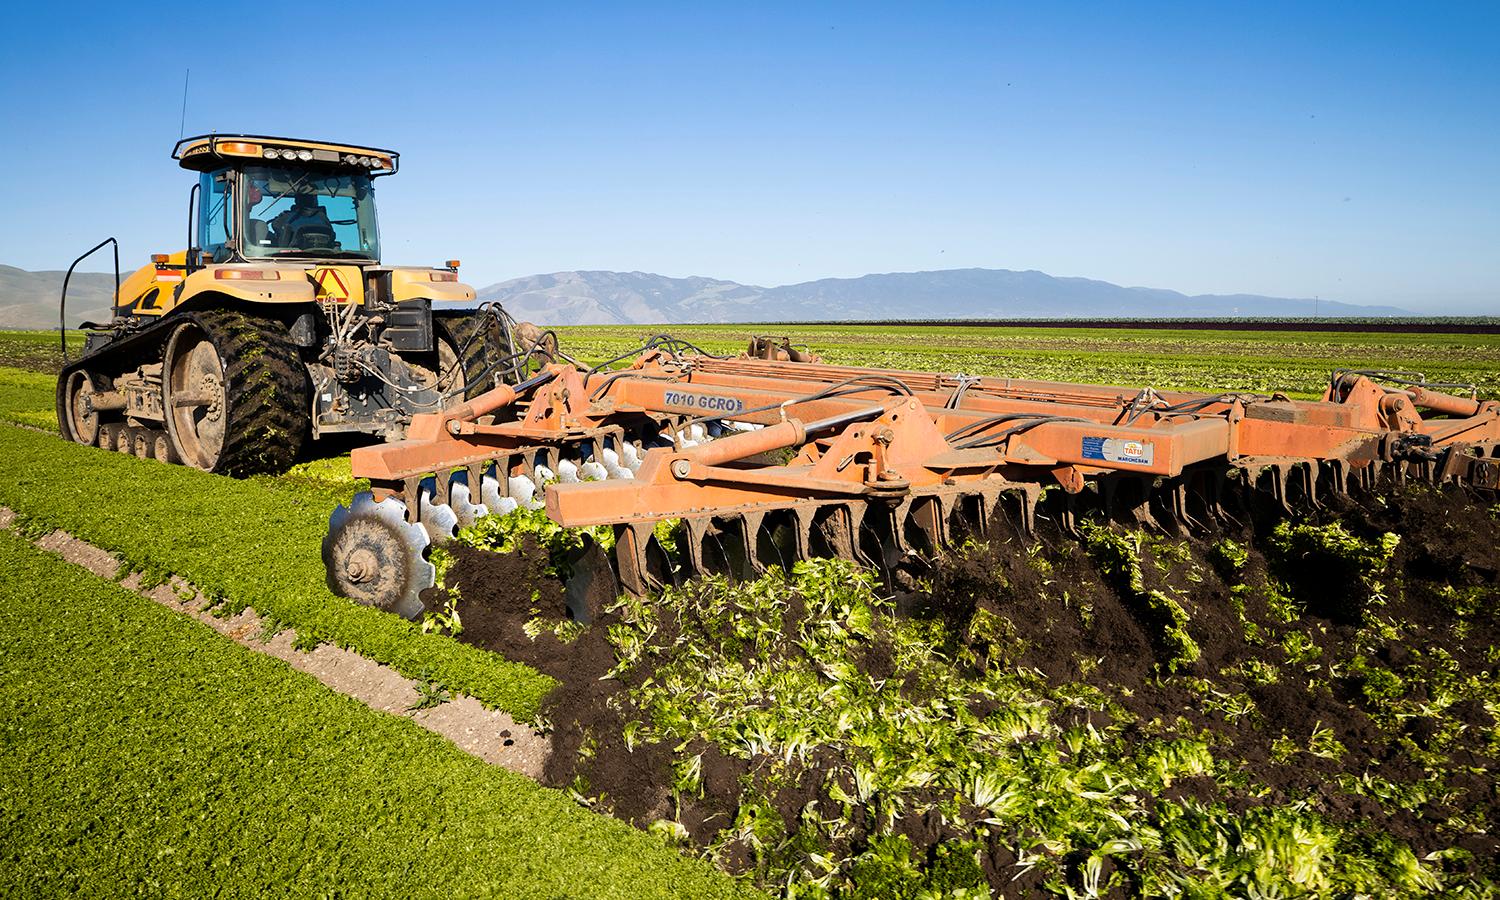 A tractor plows under what would have been Spring Mix, a popular and widely distributed salad mix on April 28, 2020, in Greenfield, Calif. (Photo by Brent Stirton/Getty Images)